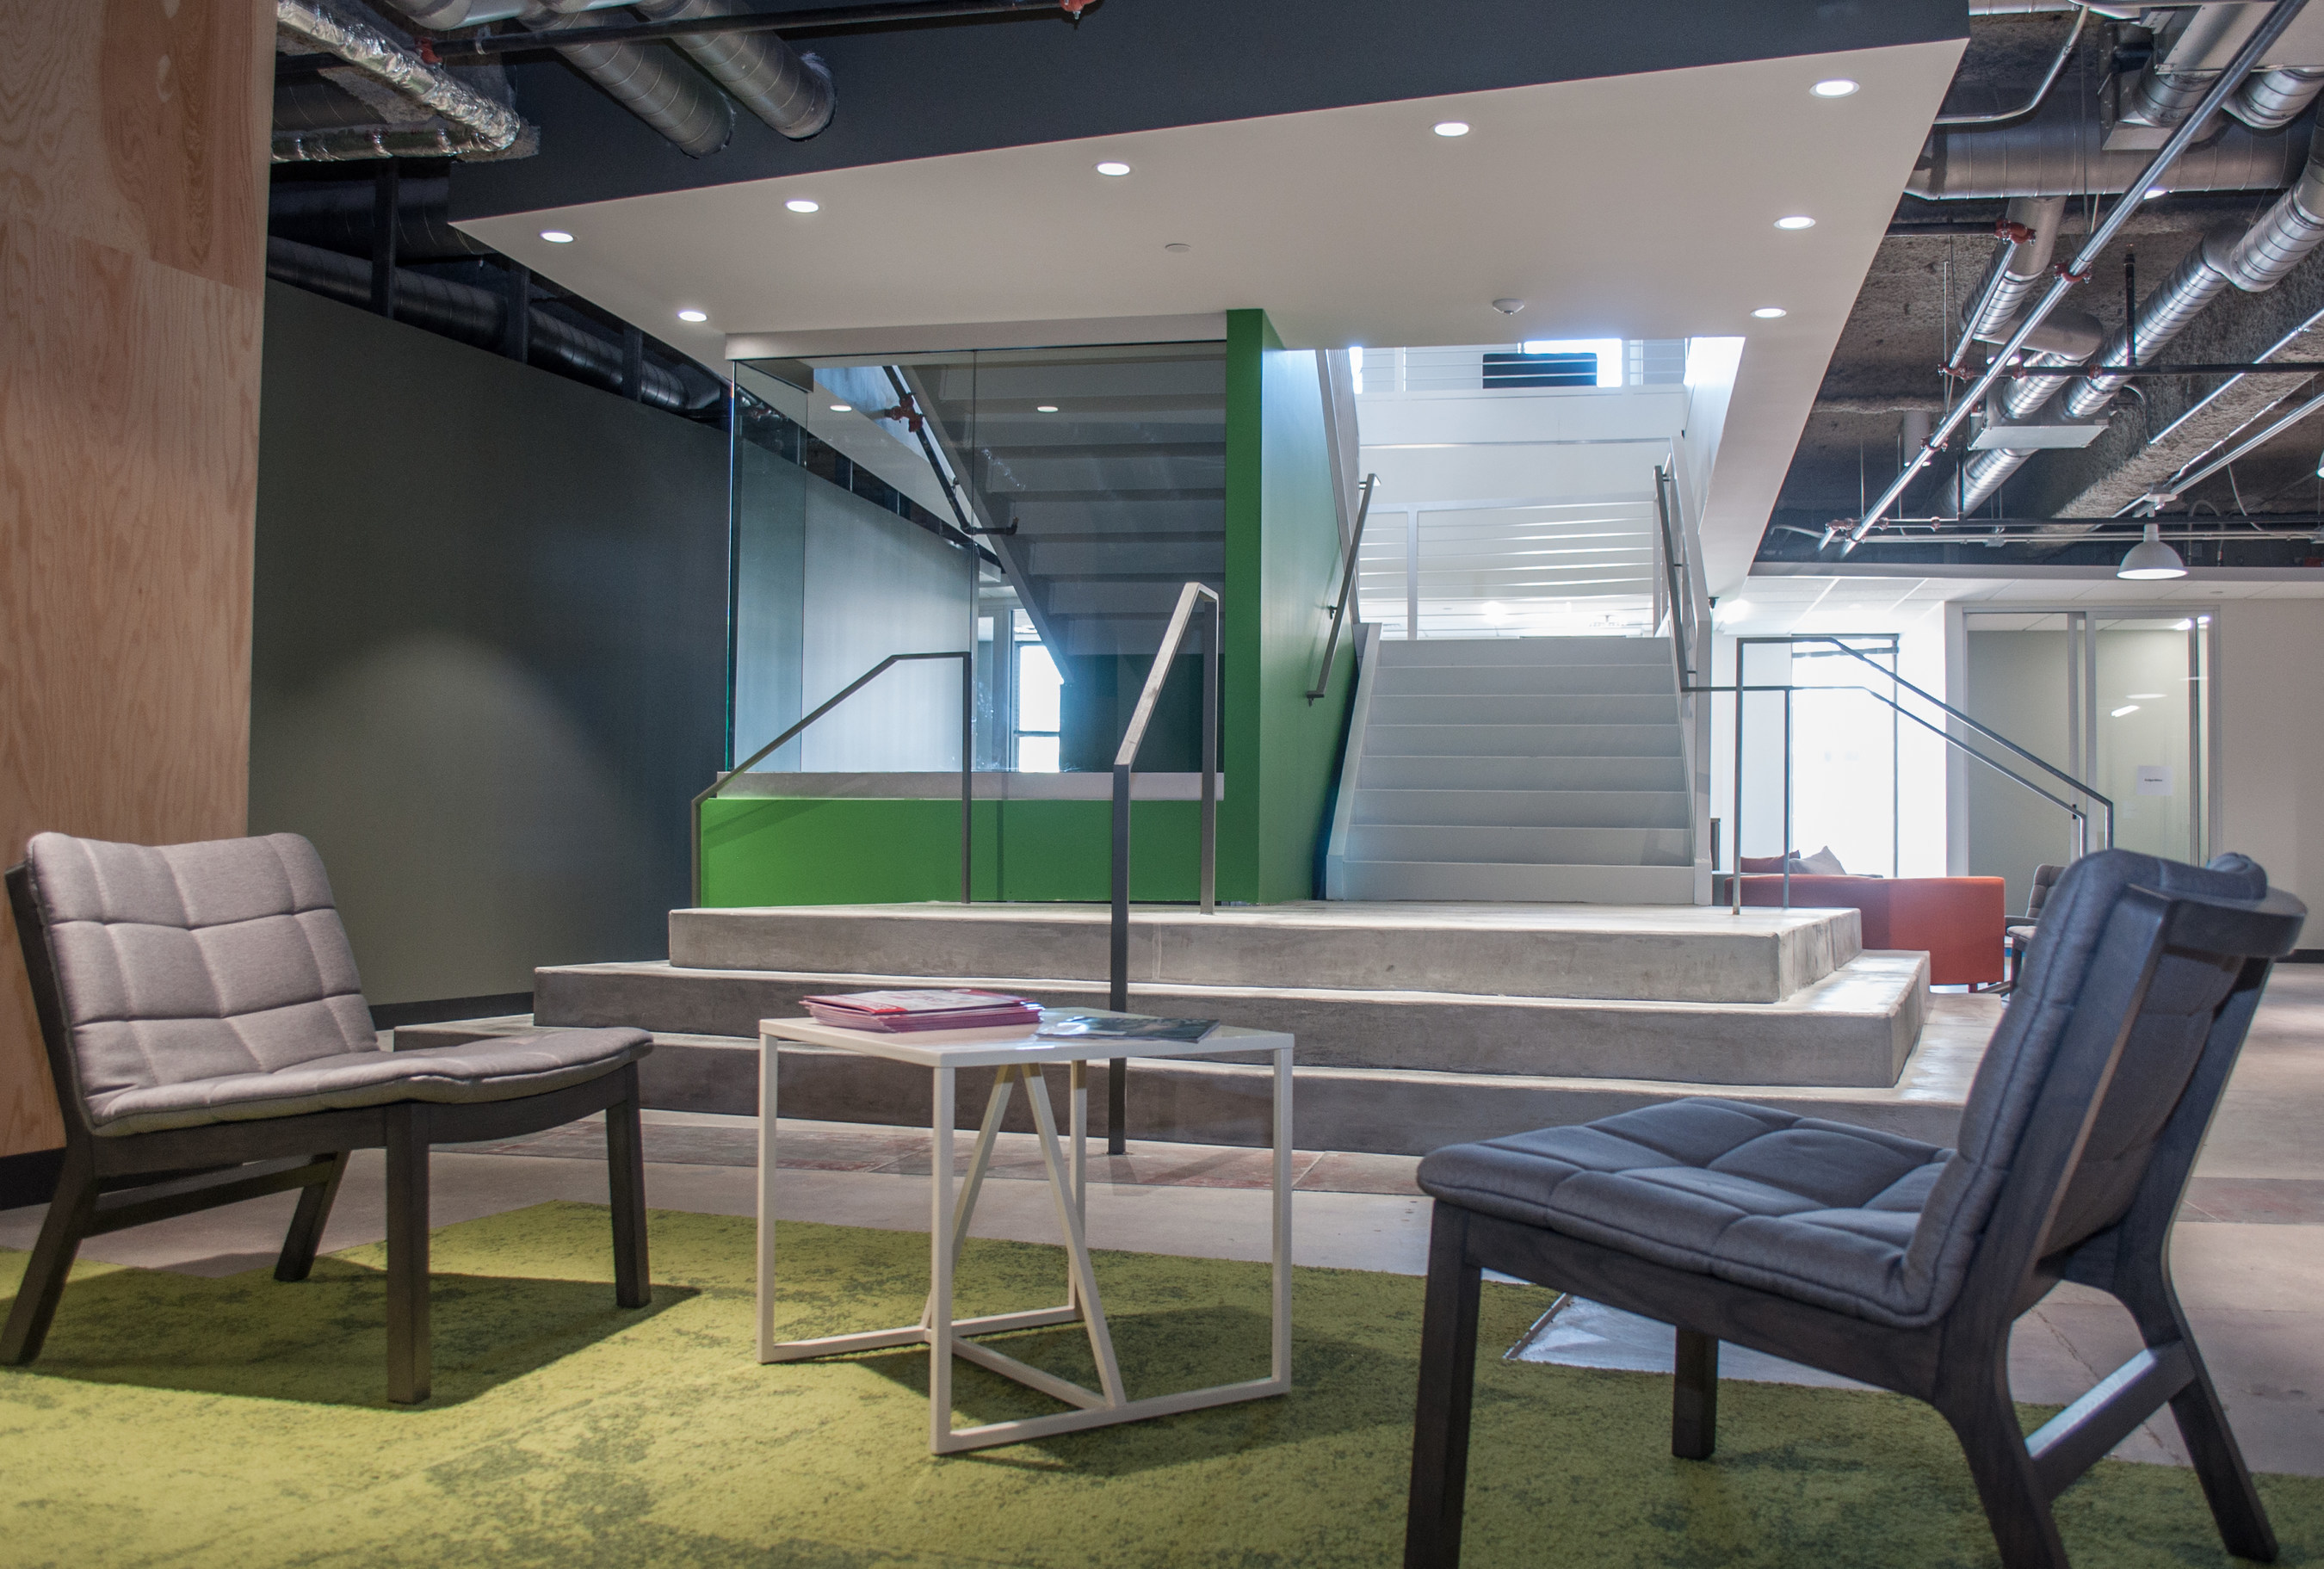 A focal point of EatStreet's new headquarters is an eye-catching staircase that connects the two floors to keep the entire team connected.